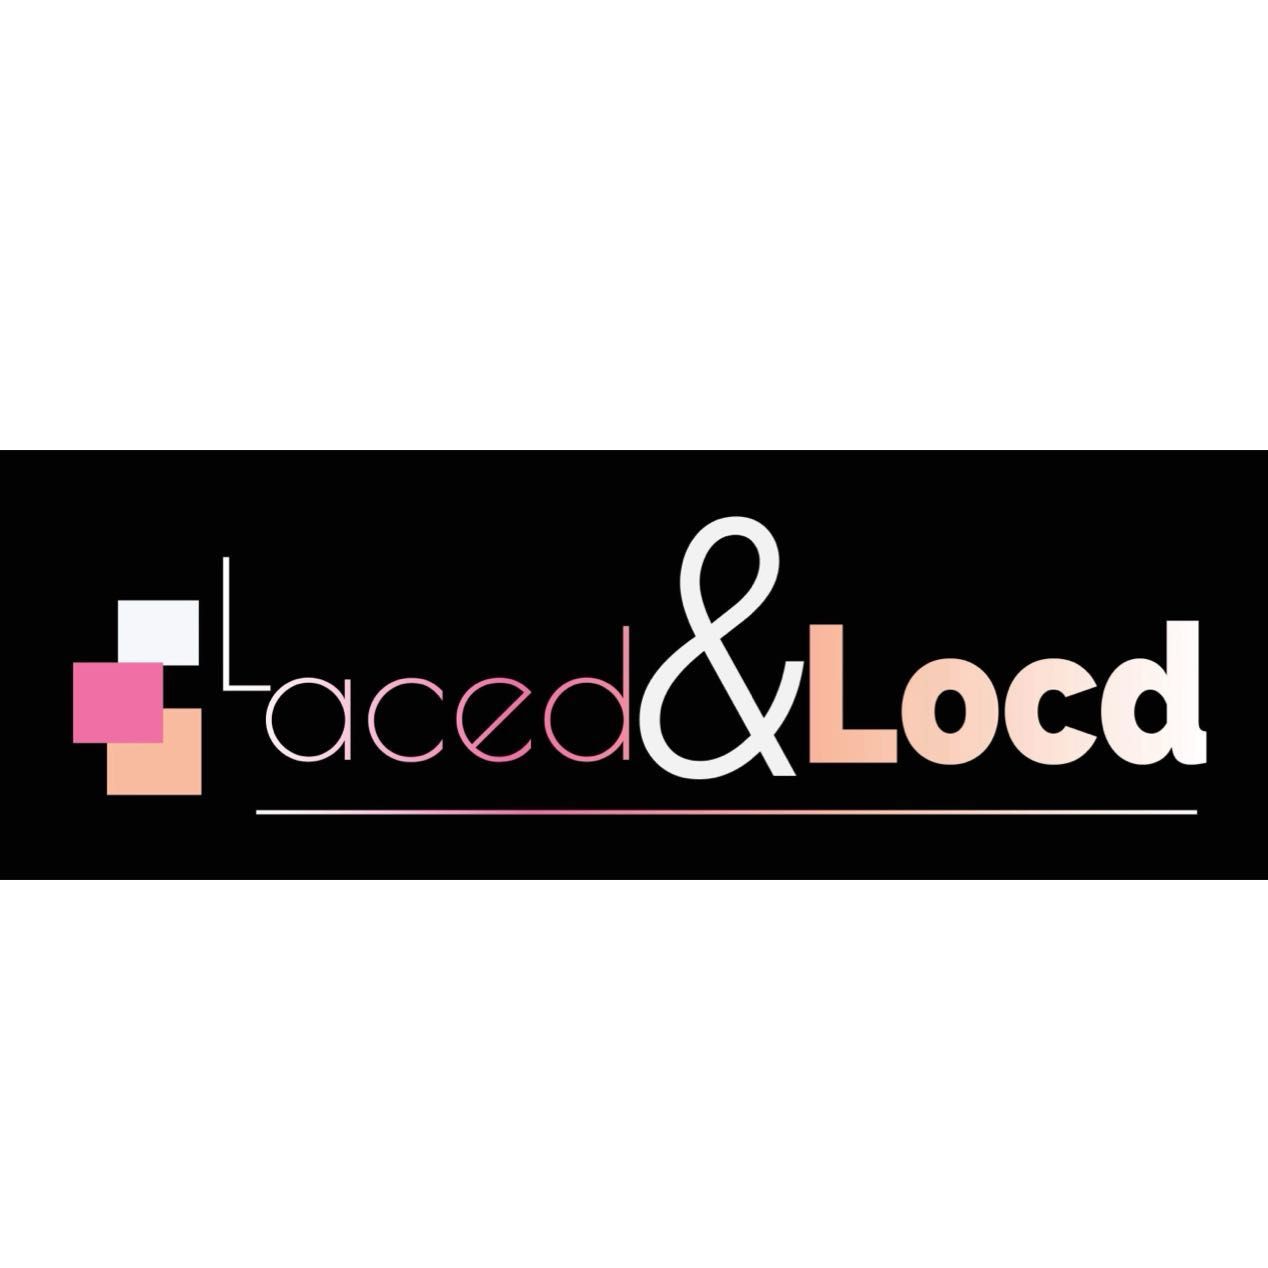 Laced and Locd, 111 Donelson Pike, 2, Nashville, 37214